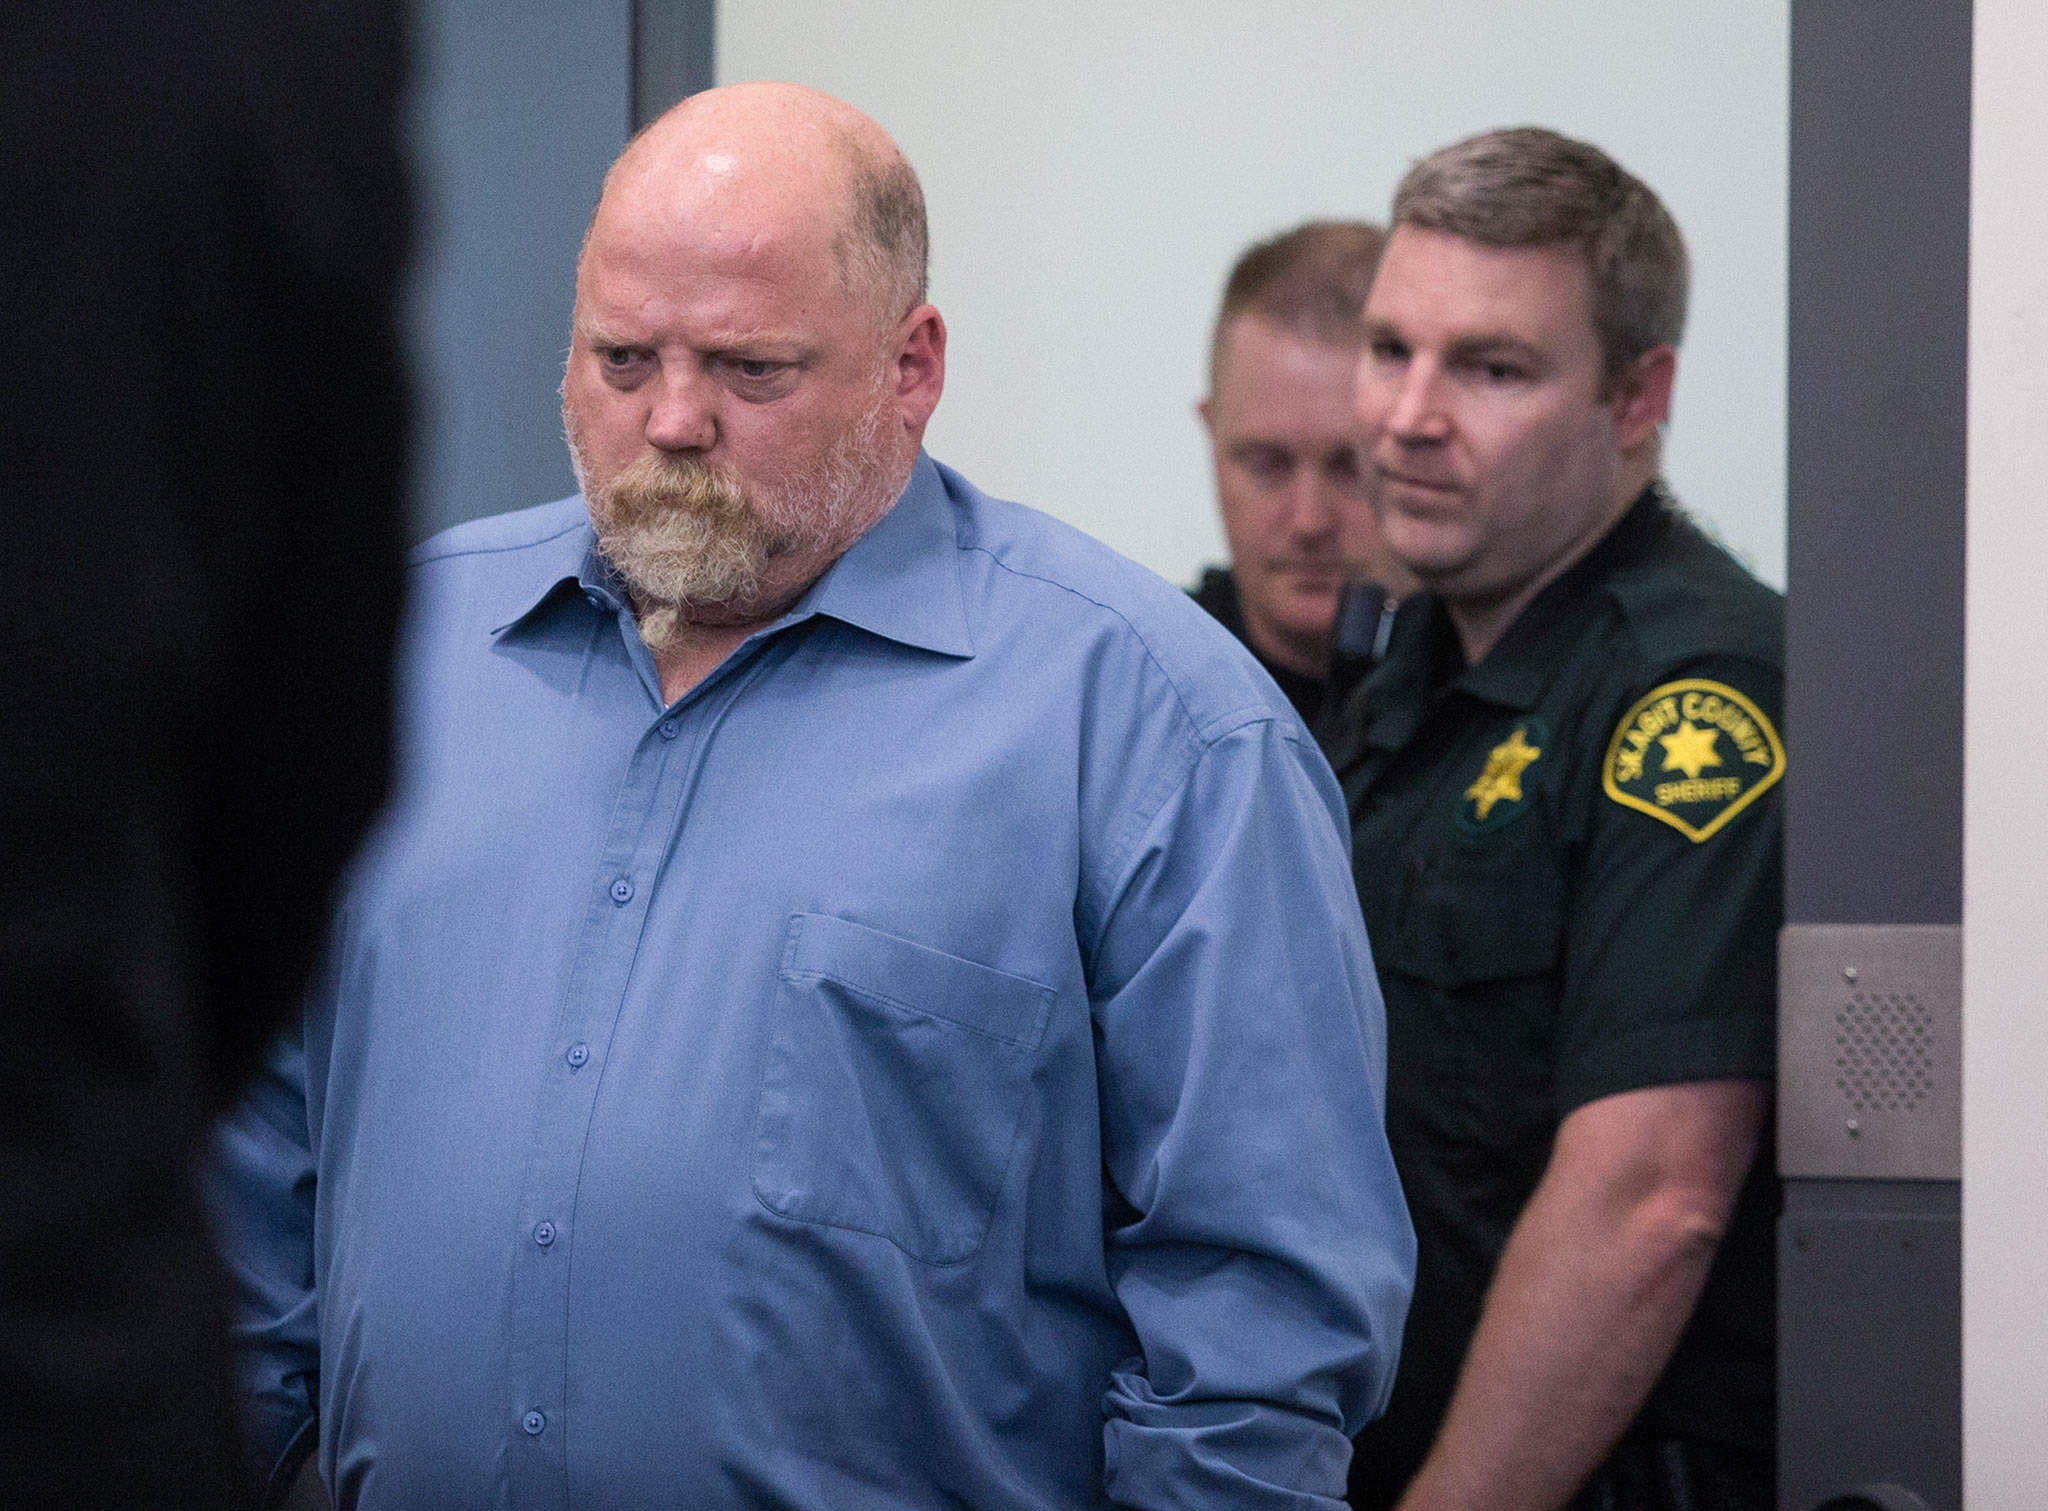 William Earl Talbott II, 55, of SeaTac, is led into court for arraignment in the 1987 death of Tanya Van Cuylenborg at the Skagit County Community Justice Center on Friday in Mount Vernon. (Andy Bronson / The Herald)